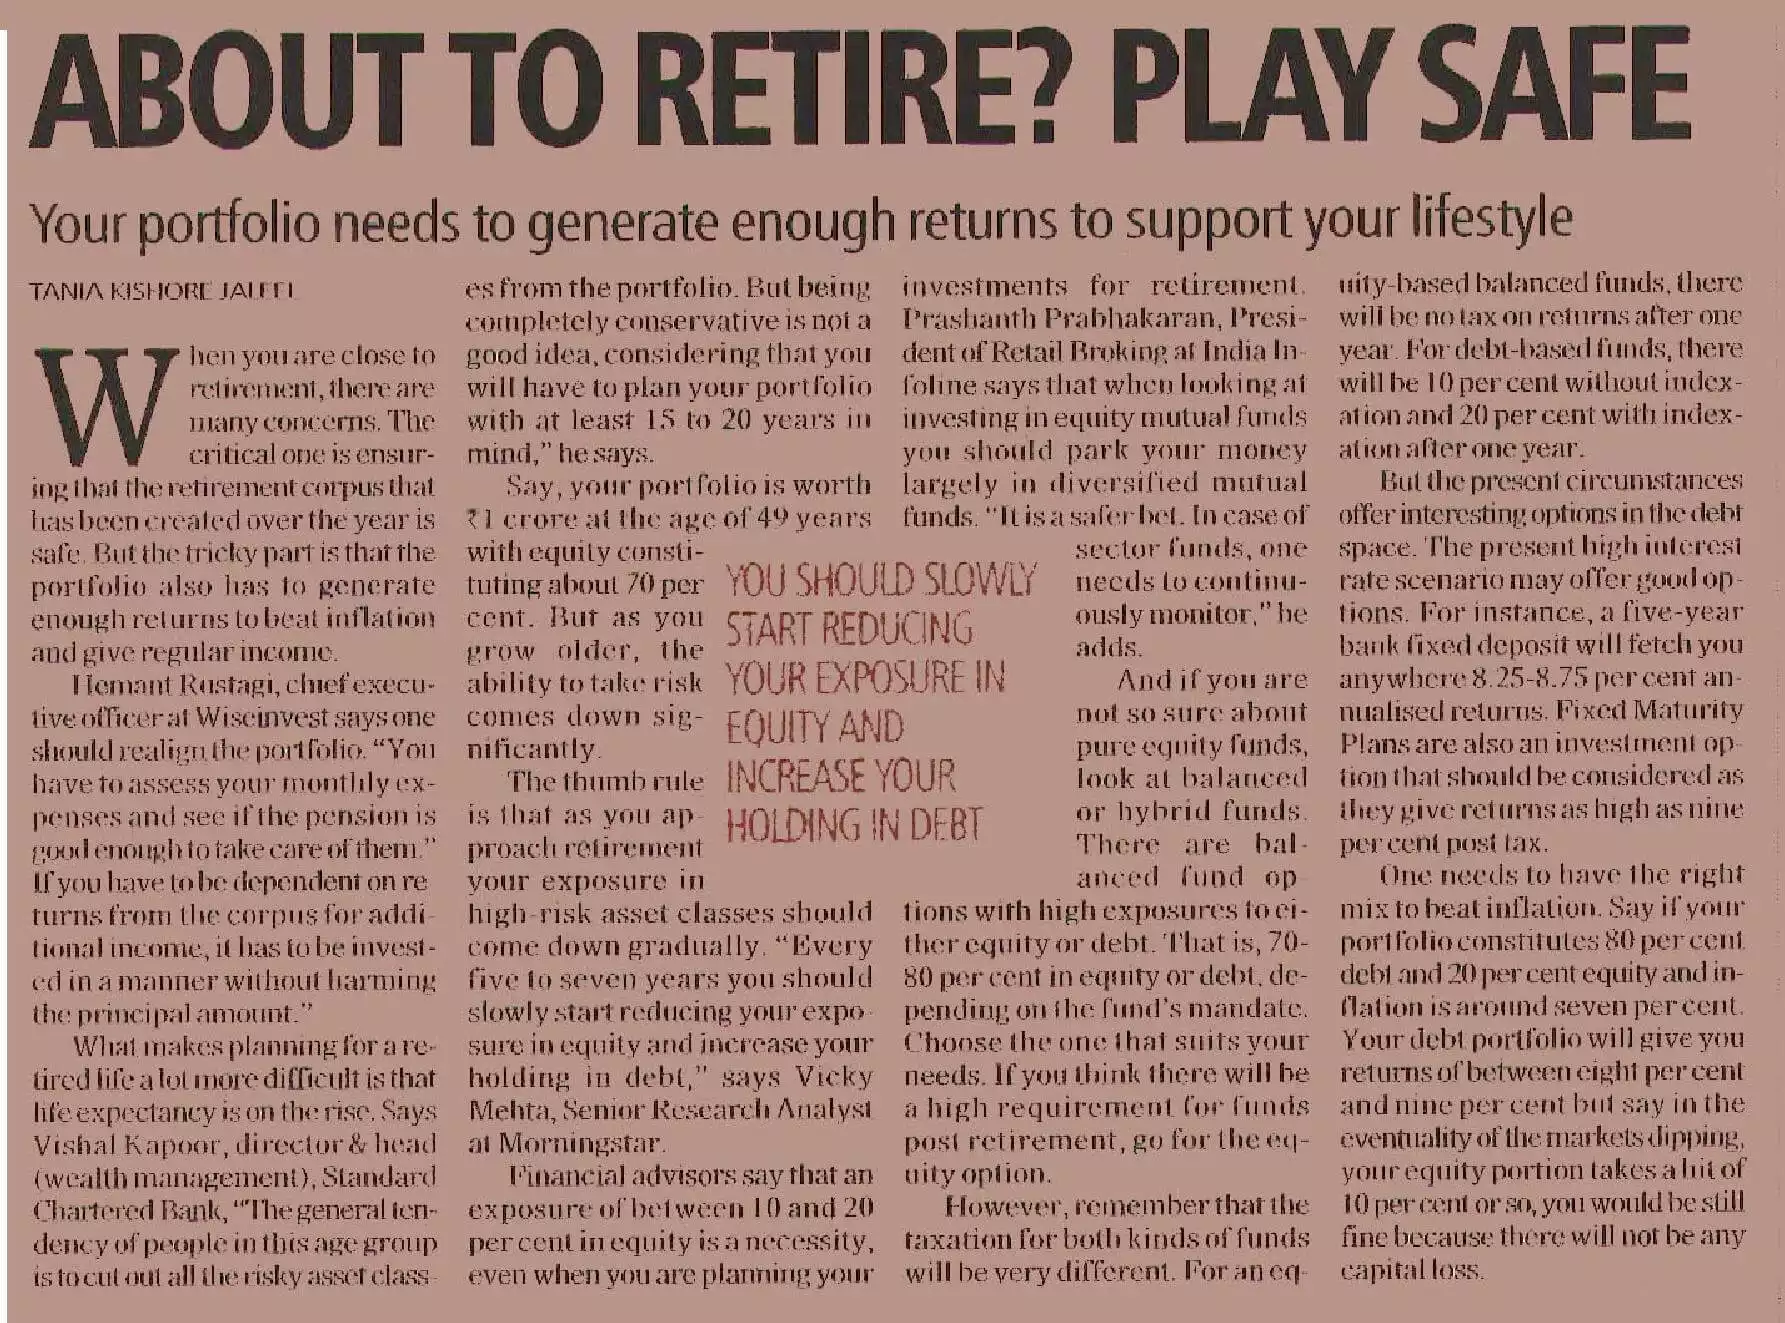 ABOUT TO RETIRE? PLAY SAFE